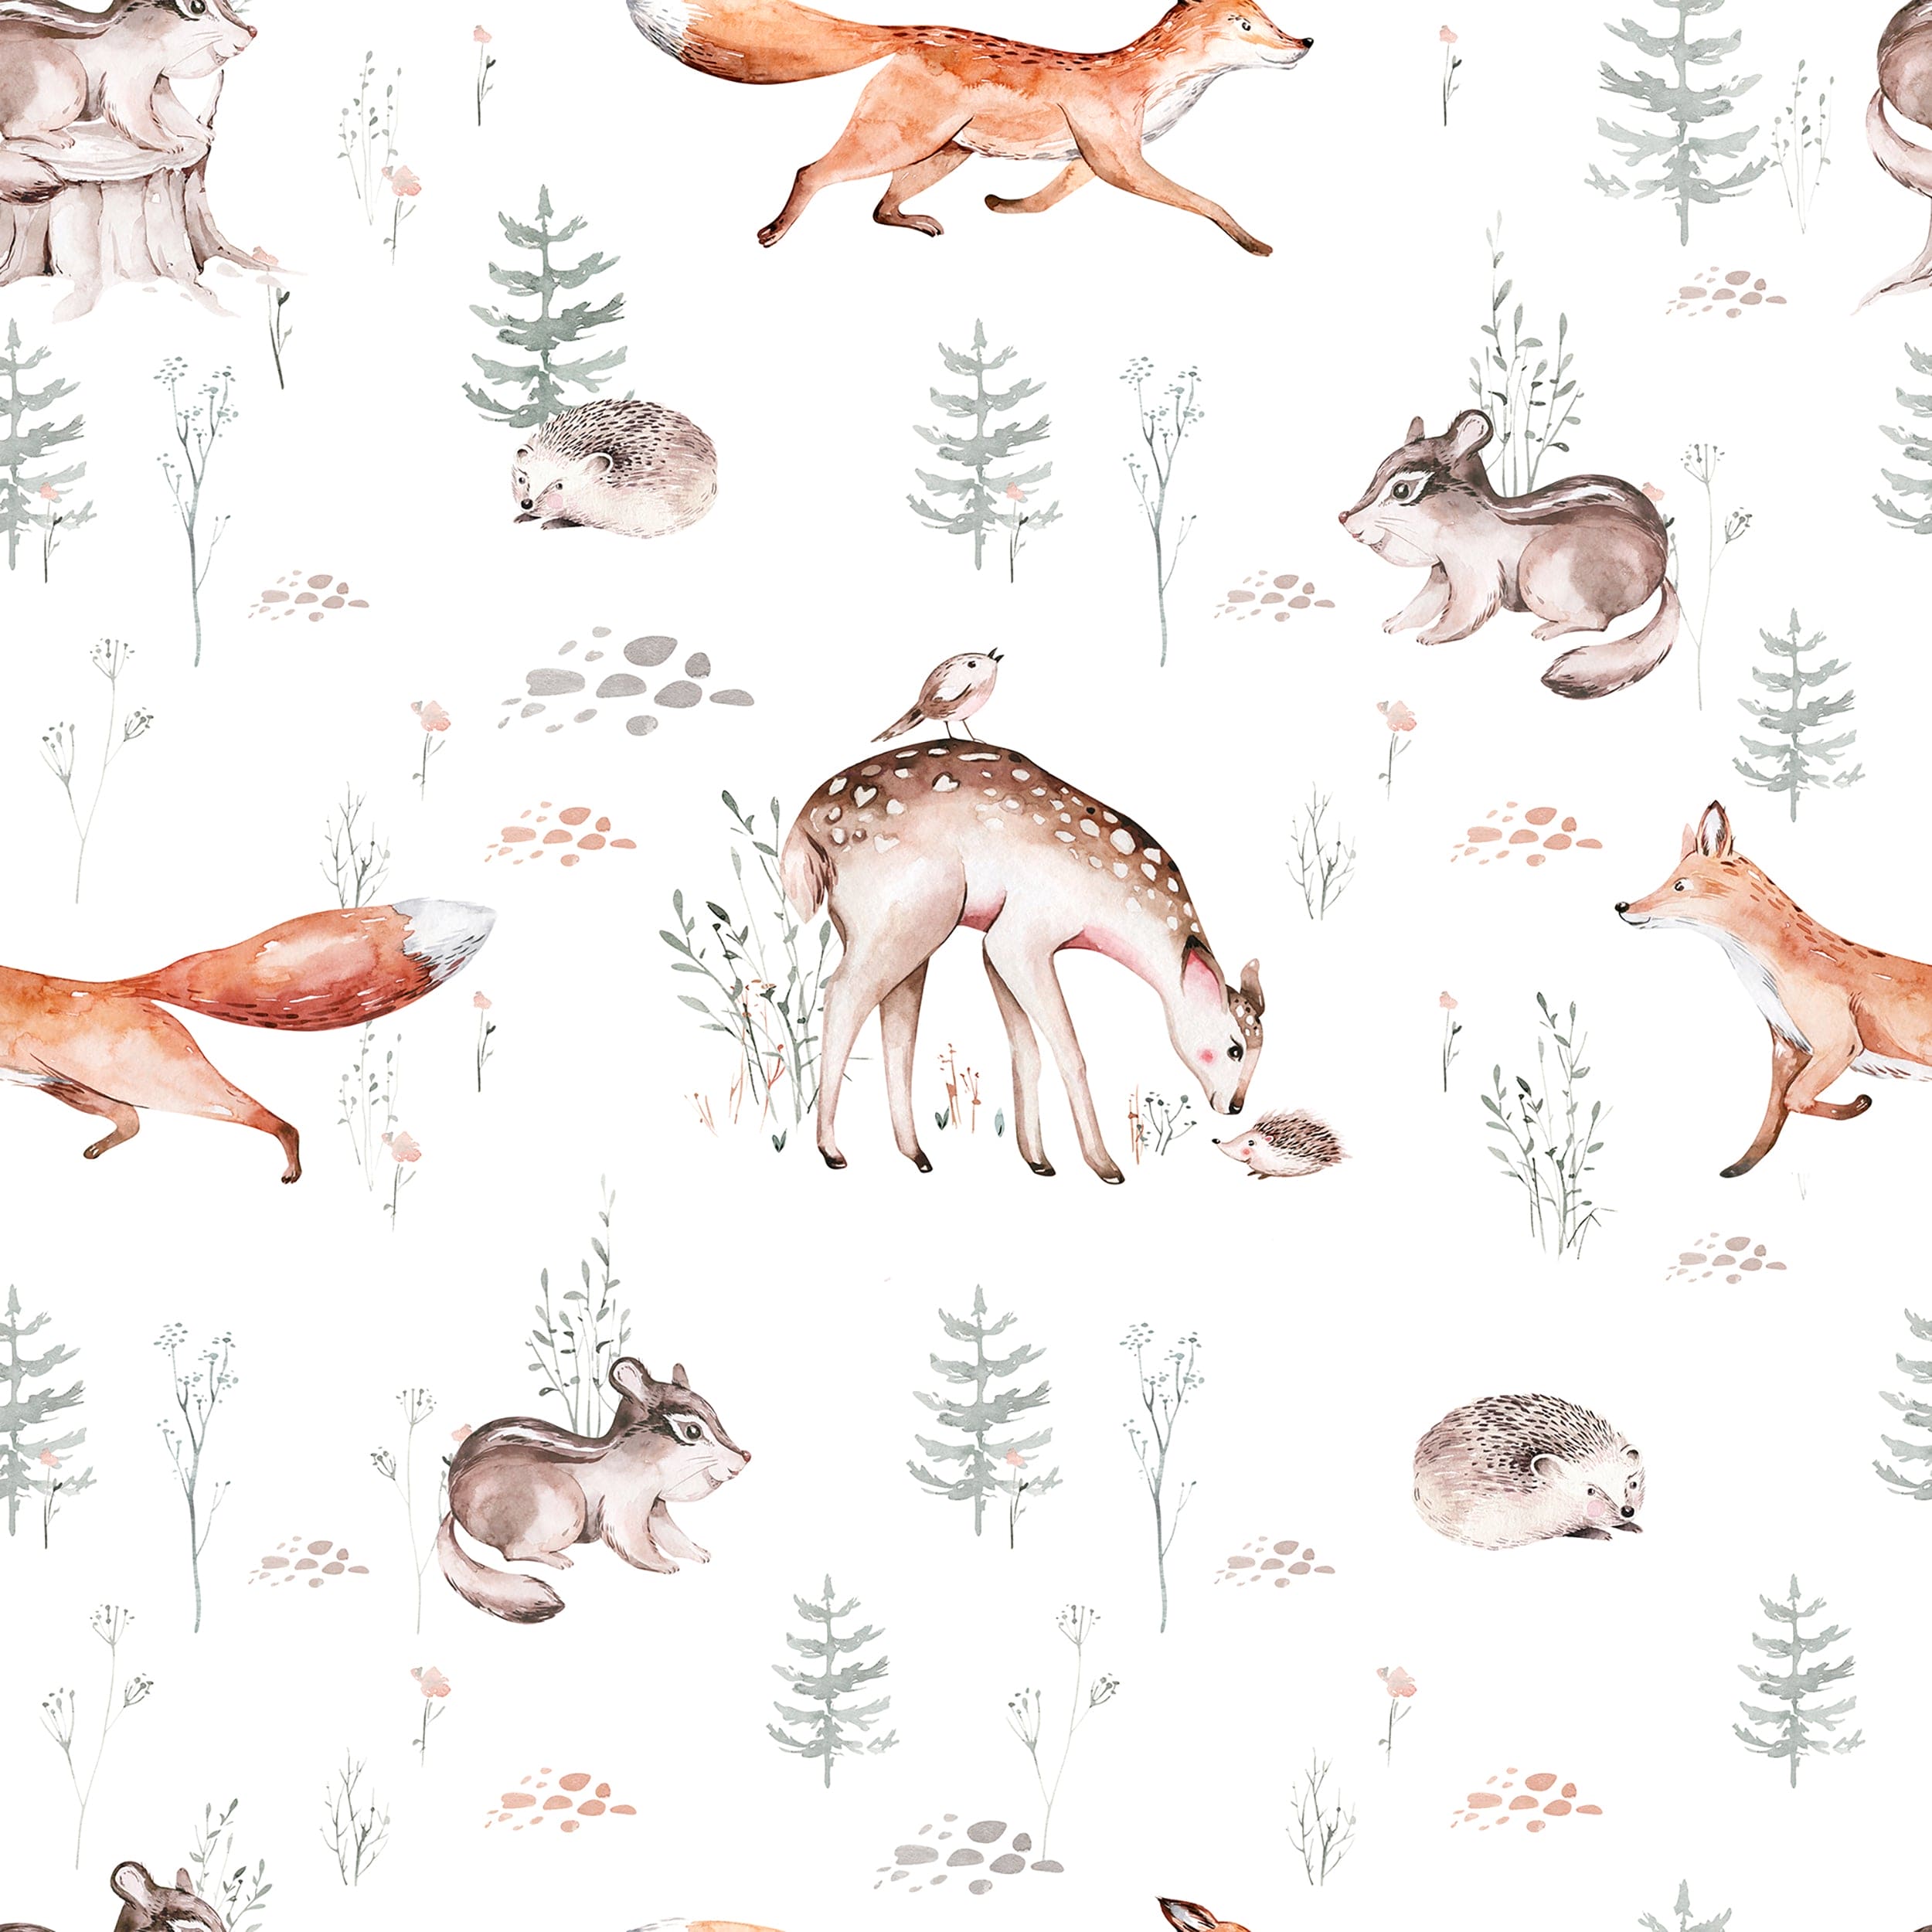 A close-up view of the Woodland Wonder Wallpaper, illustrating a whimsical pattern of forest animals and plants. Detailed images of foxes, deer, and rabbits blend seamlessly with light vegetation, set against a soft, neutral background.